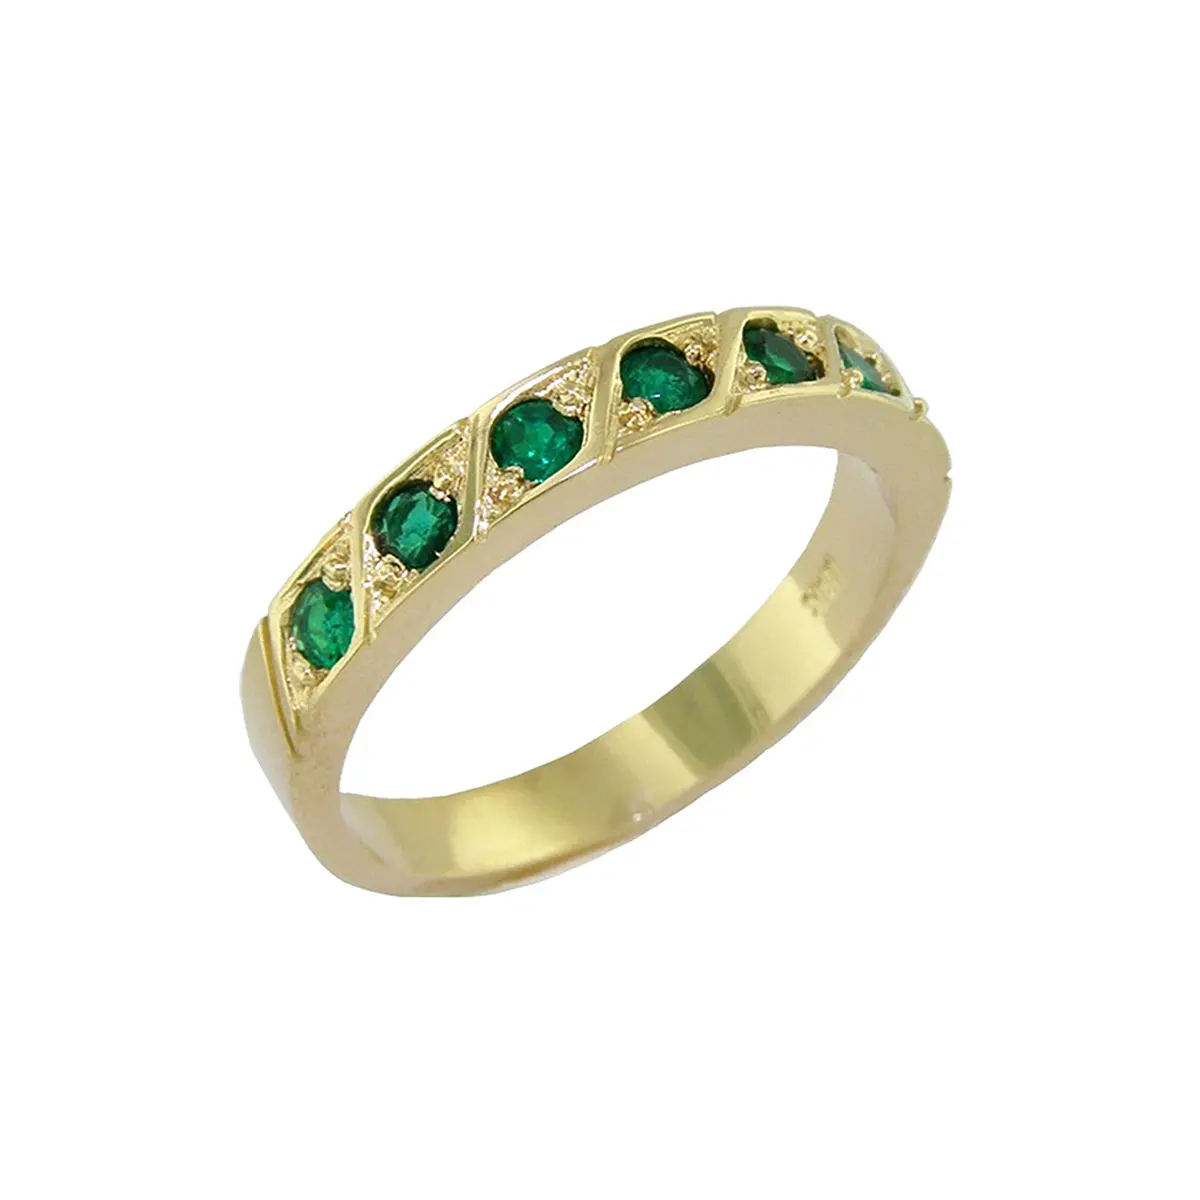 Solid 18K gold emerald wedding band ring with 7 round cut natural Colombian emeralds in 0.32 Ct. t.w. with dark green color